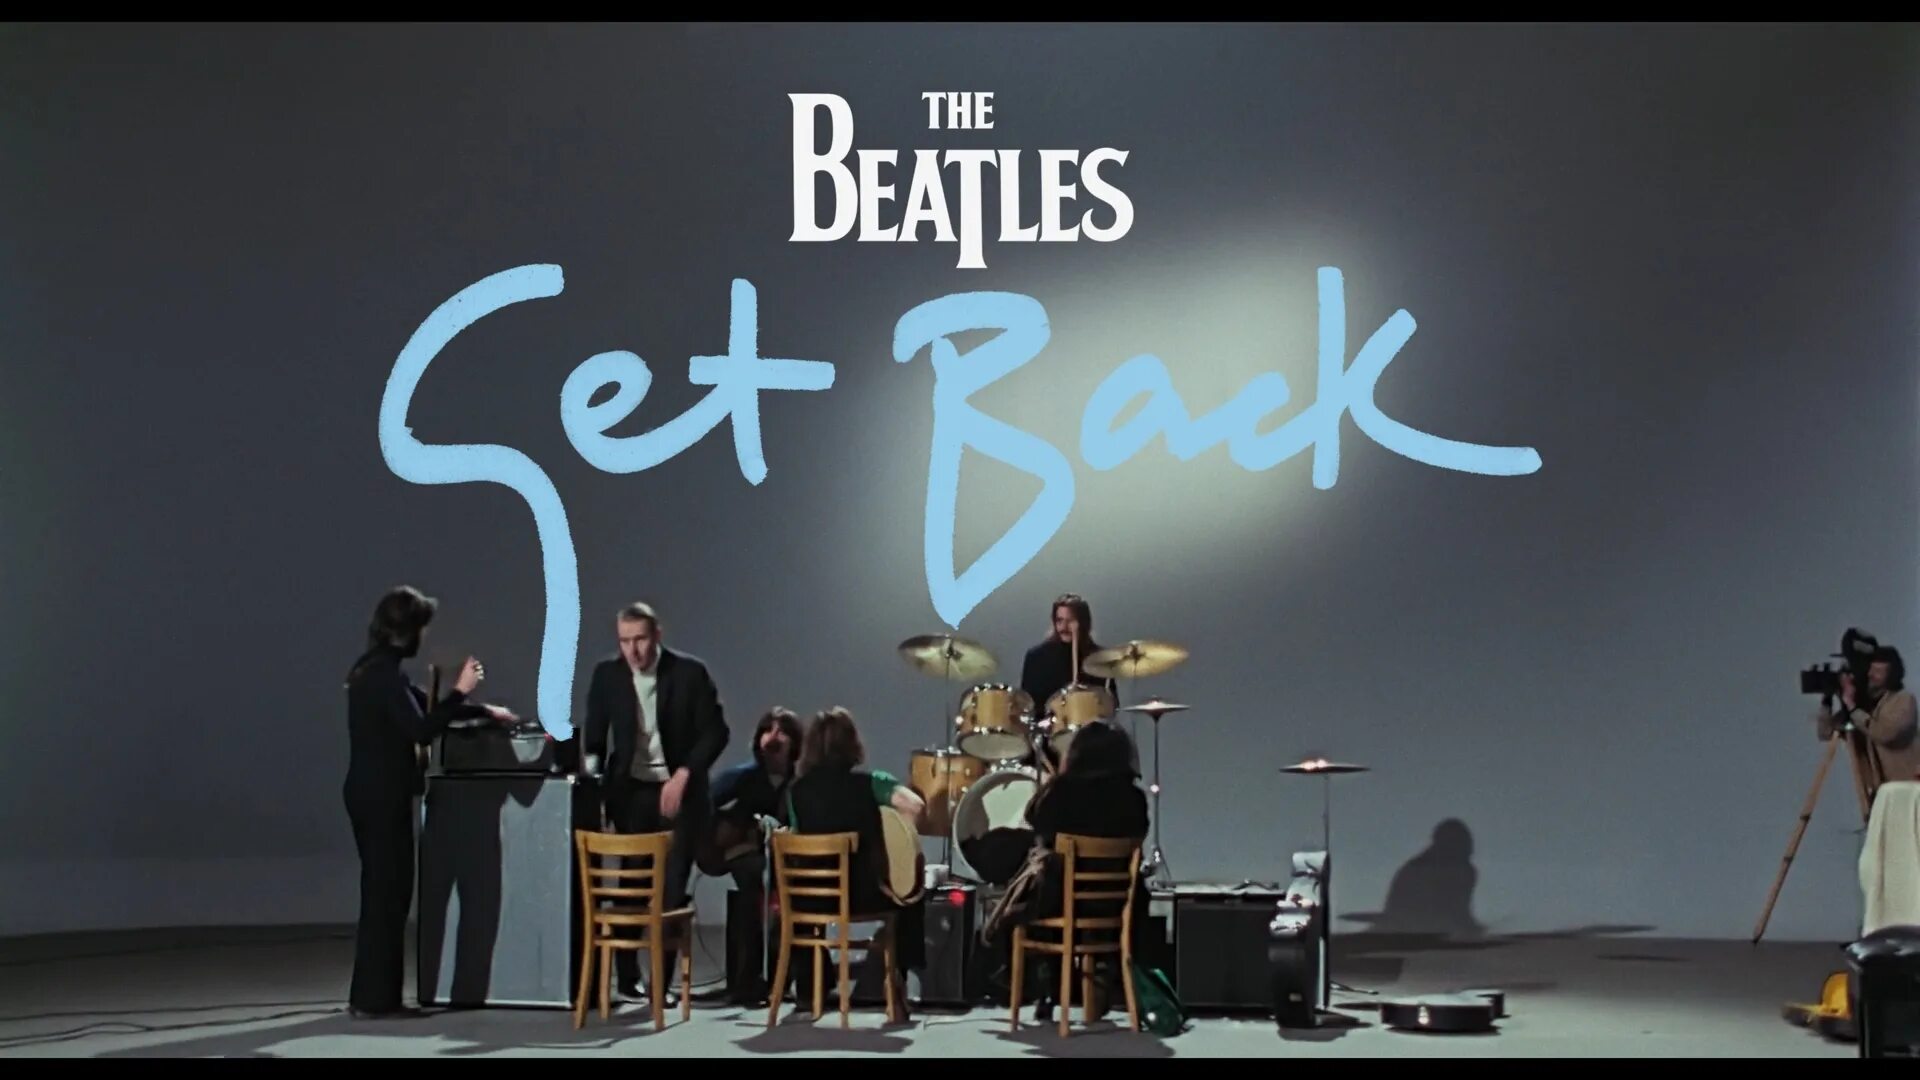 The Beatles: get back / the Beatles: Вернись. Get back the beatles